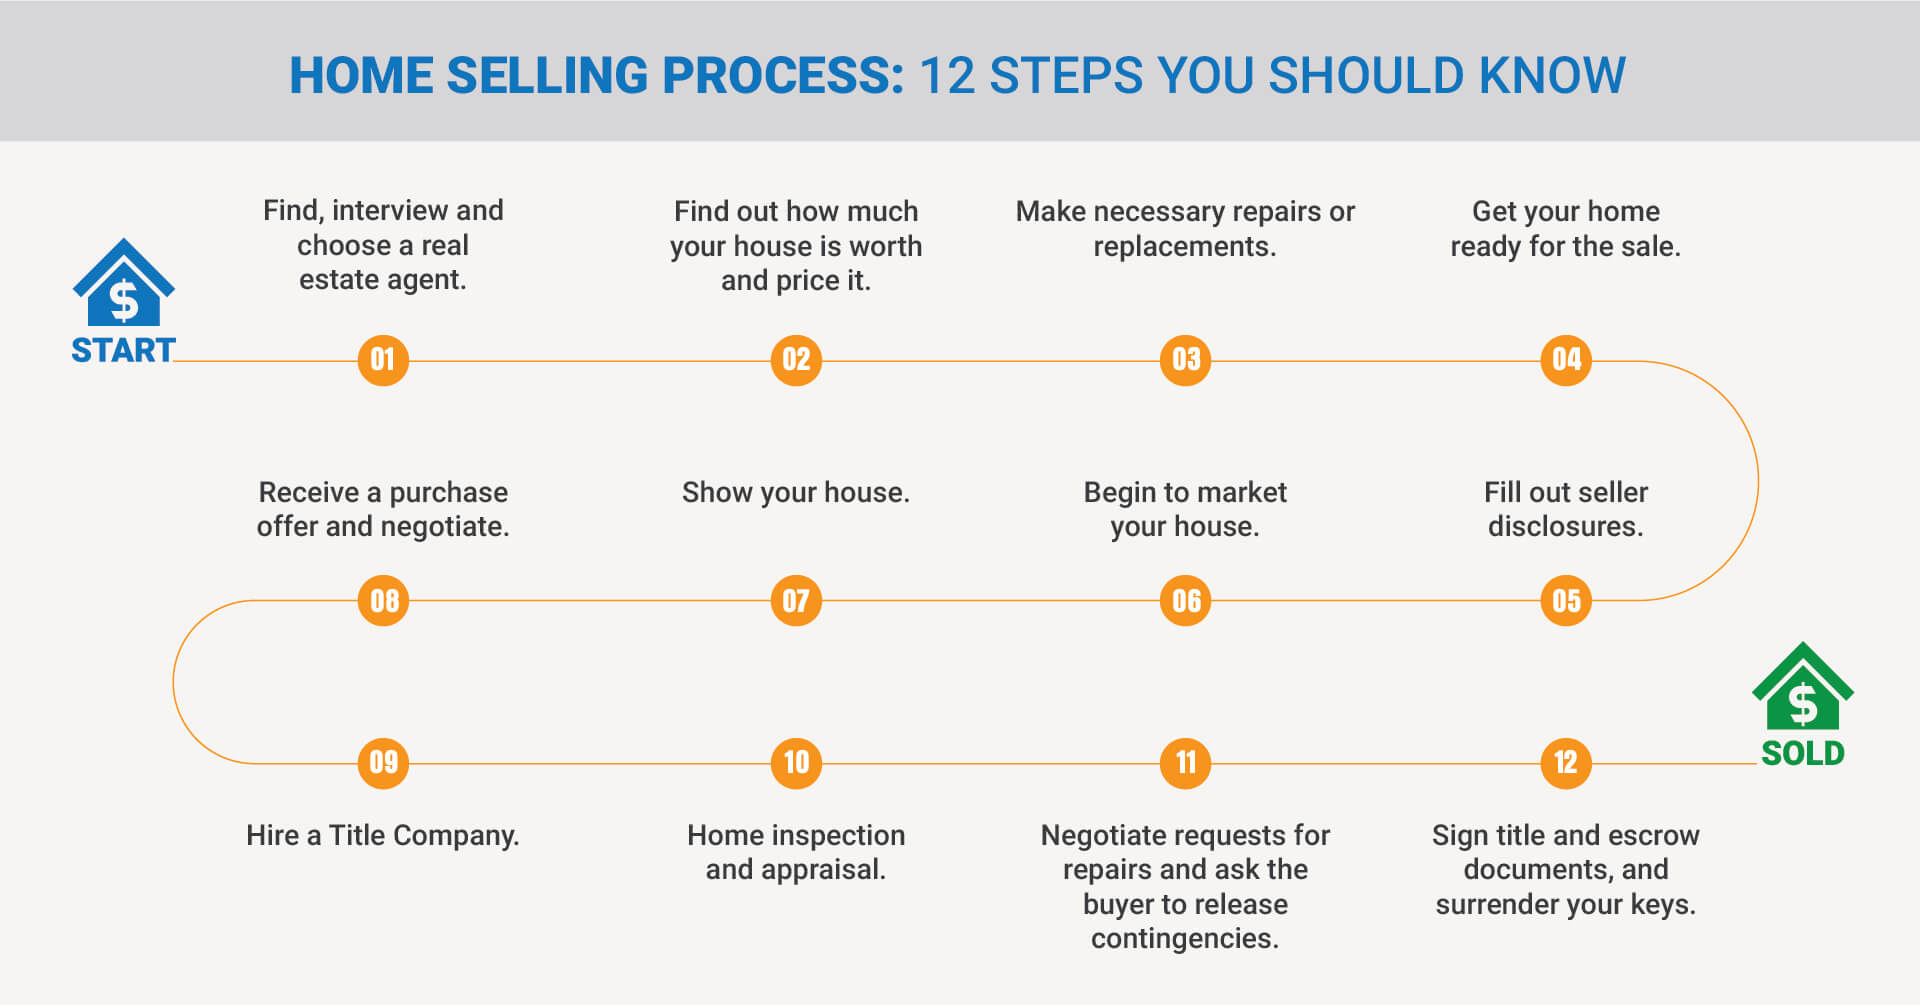 Home Selling Process: 12 Steps You Should Know | HOMEiA